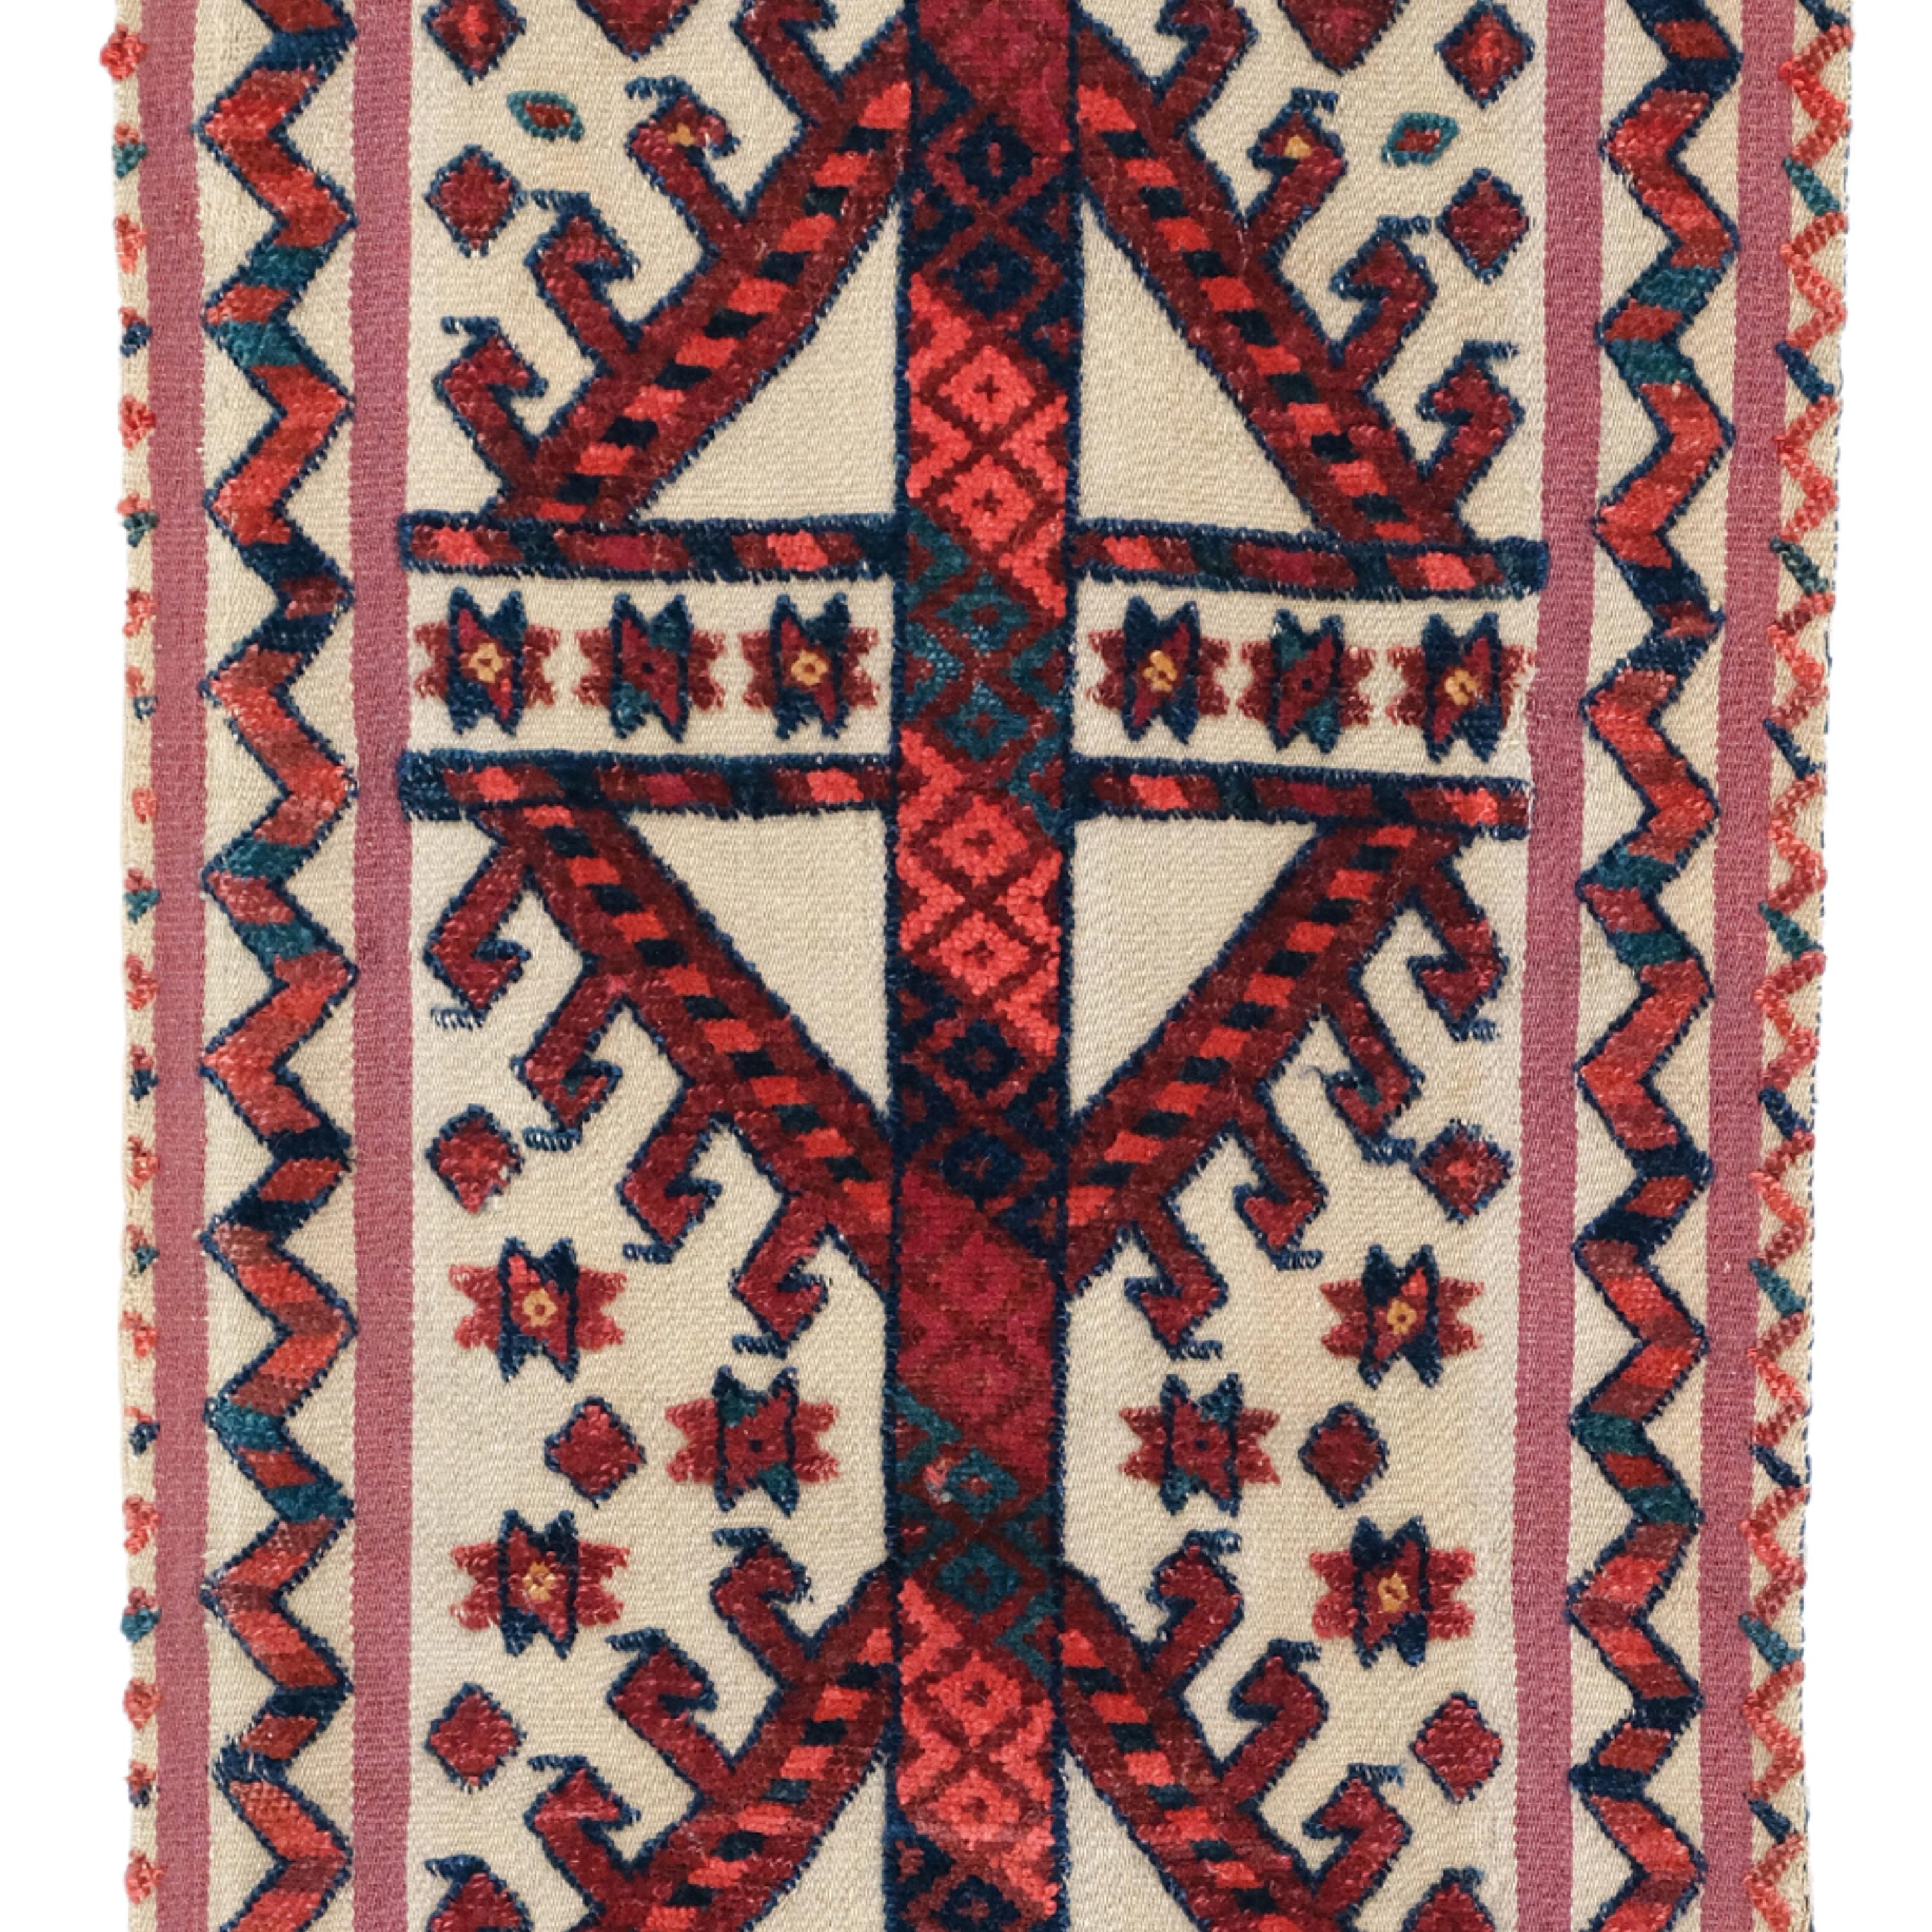 Antique Tentband Fragment - 19th Century Turkmen Tekke Tentband Fragment In Good Condition For Sale In Sultanahmet, 34